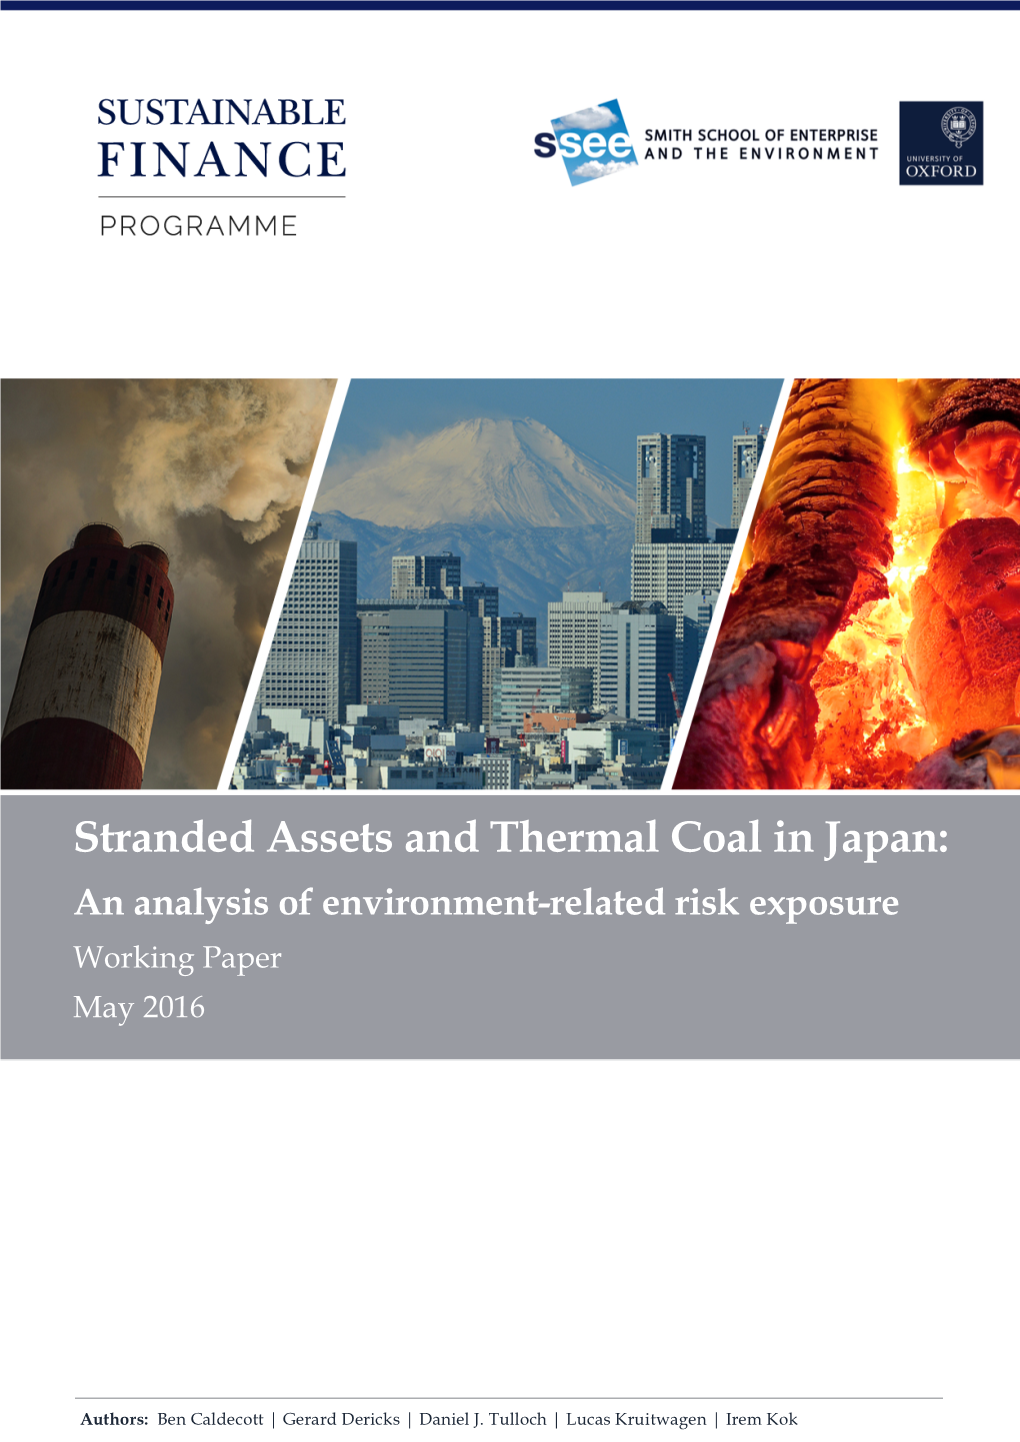 Stranded Assets and Thermal Coal in Japan: an Analysis of Environment-Related Risk Exposure Working Paper May 2016